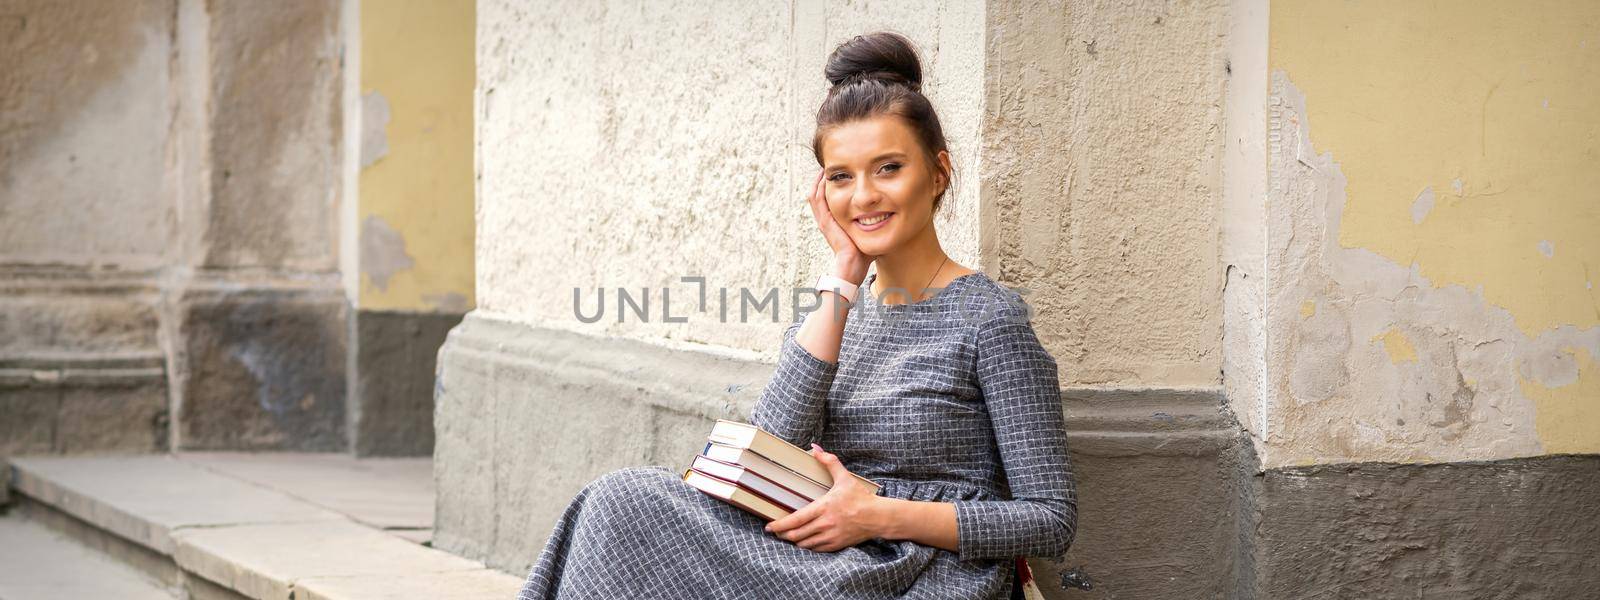 Female student in a long dress holding books looking at camera sitting on stairs of university building outdoors